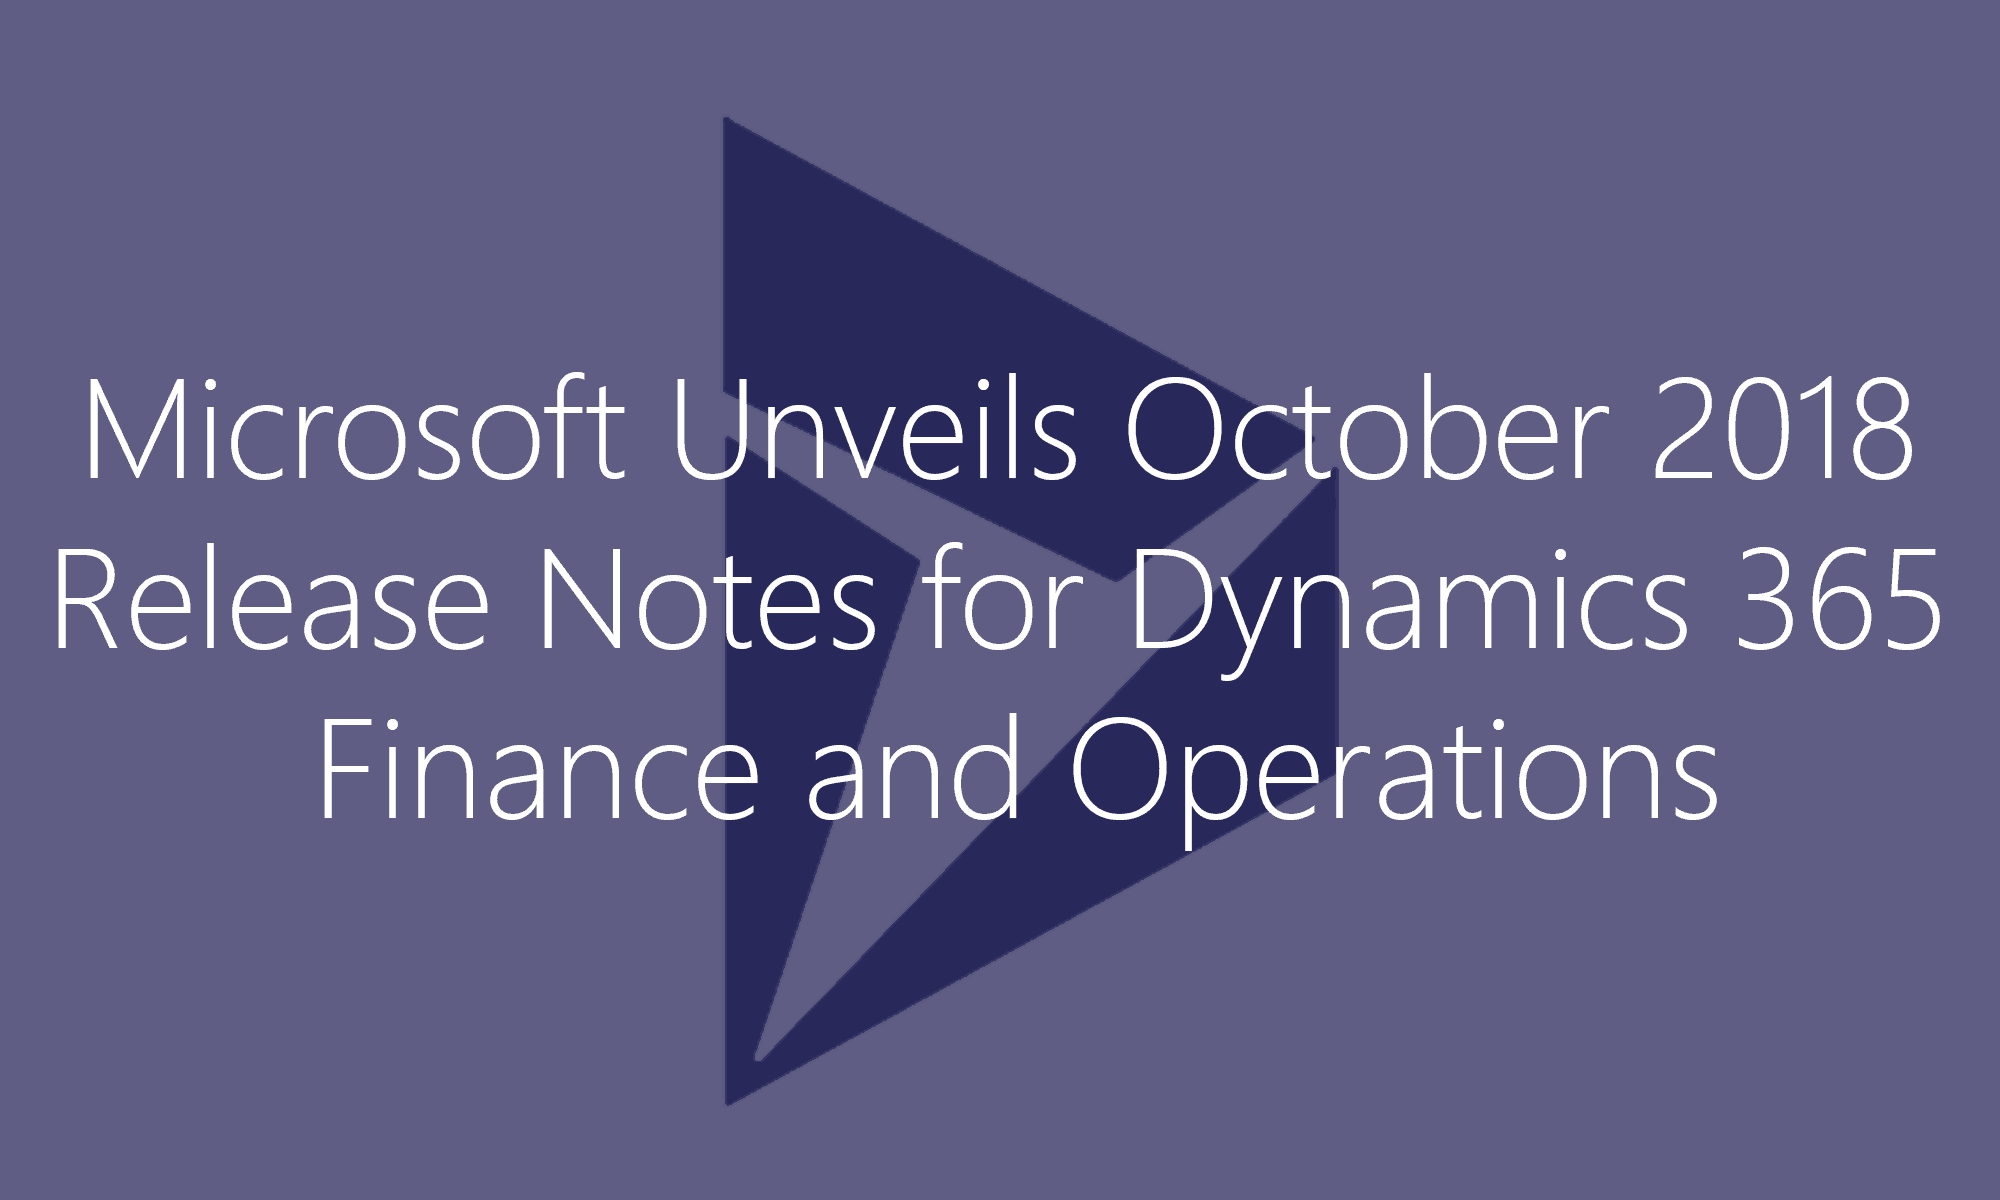 Dynamics 365 October 2018 Release Notes